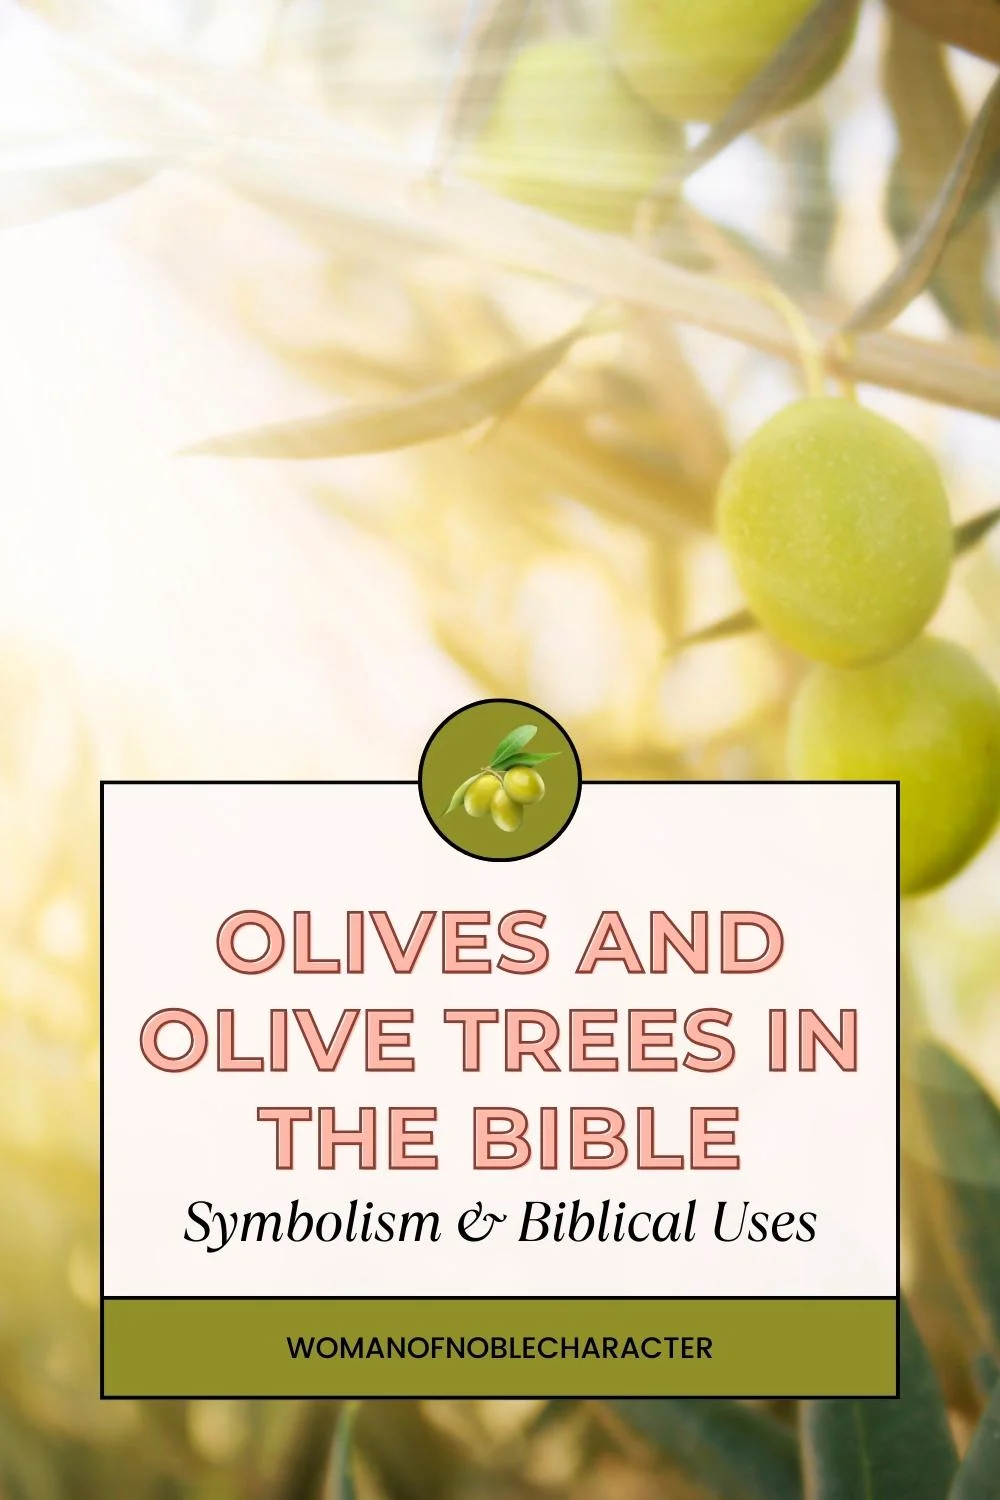 image of olive growing on tree for the post A Fascinating Study of Olive Trees and Olives in the Bible